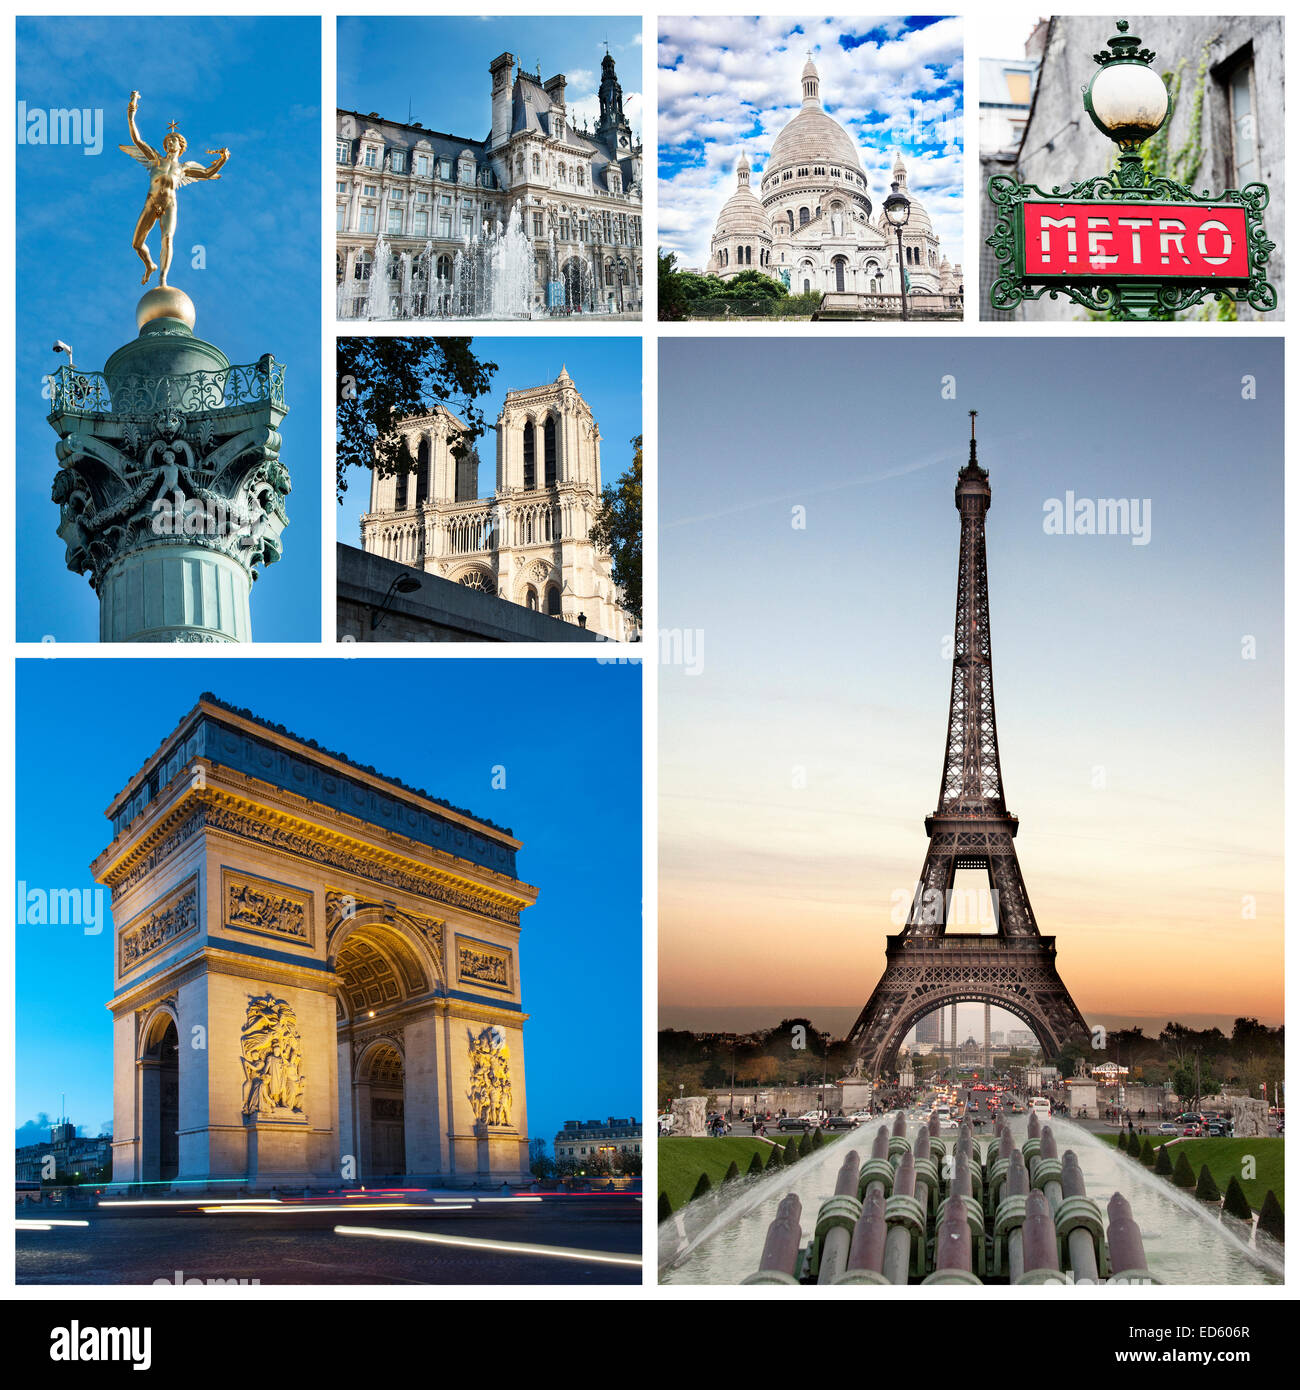 A collage of Paris landmark and monuments - France Stock Photo